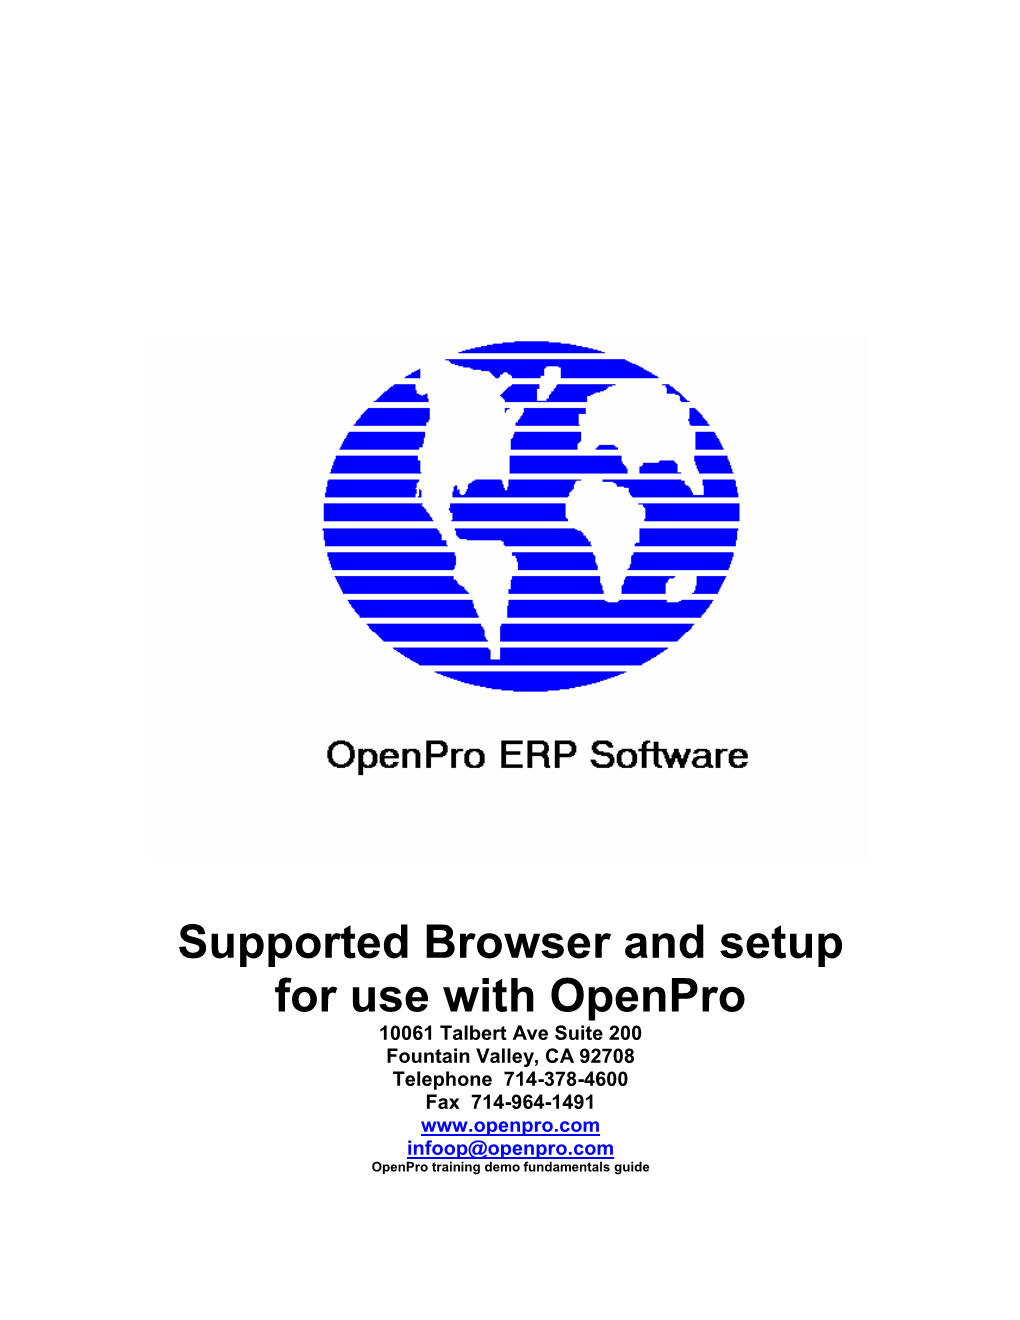 Browsers Supported by Openpro and Setup